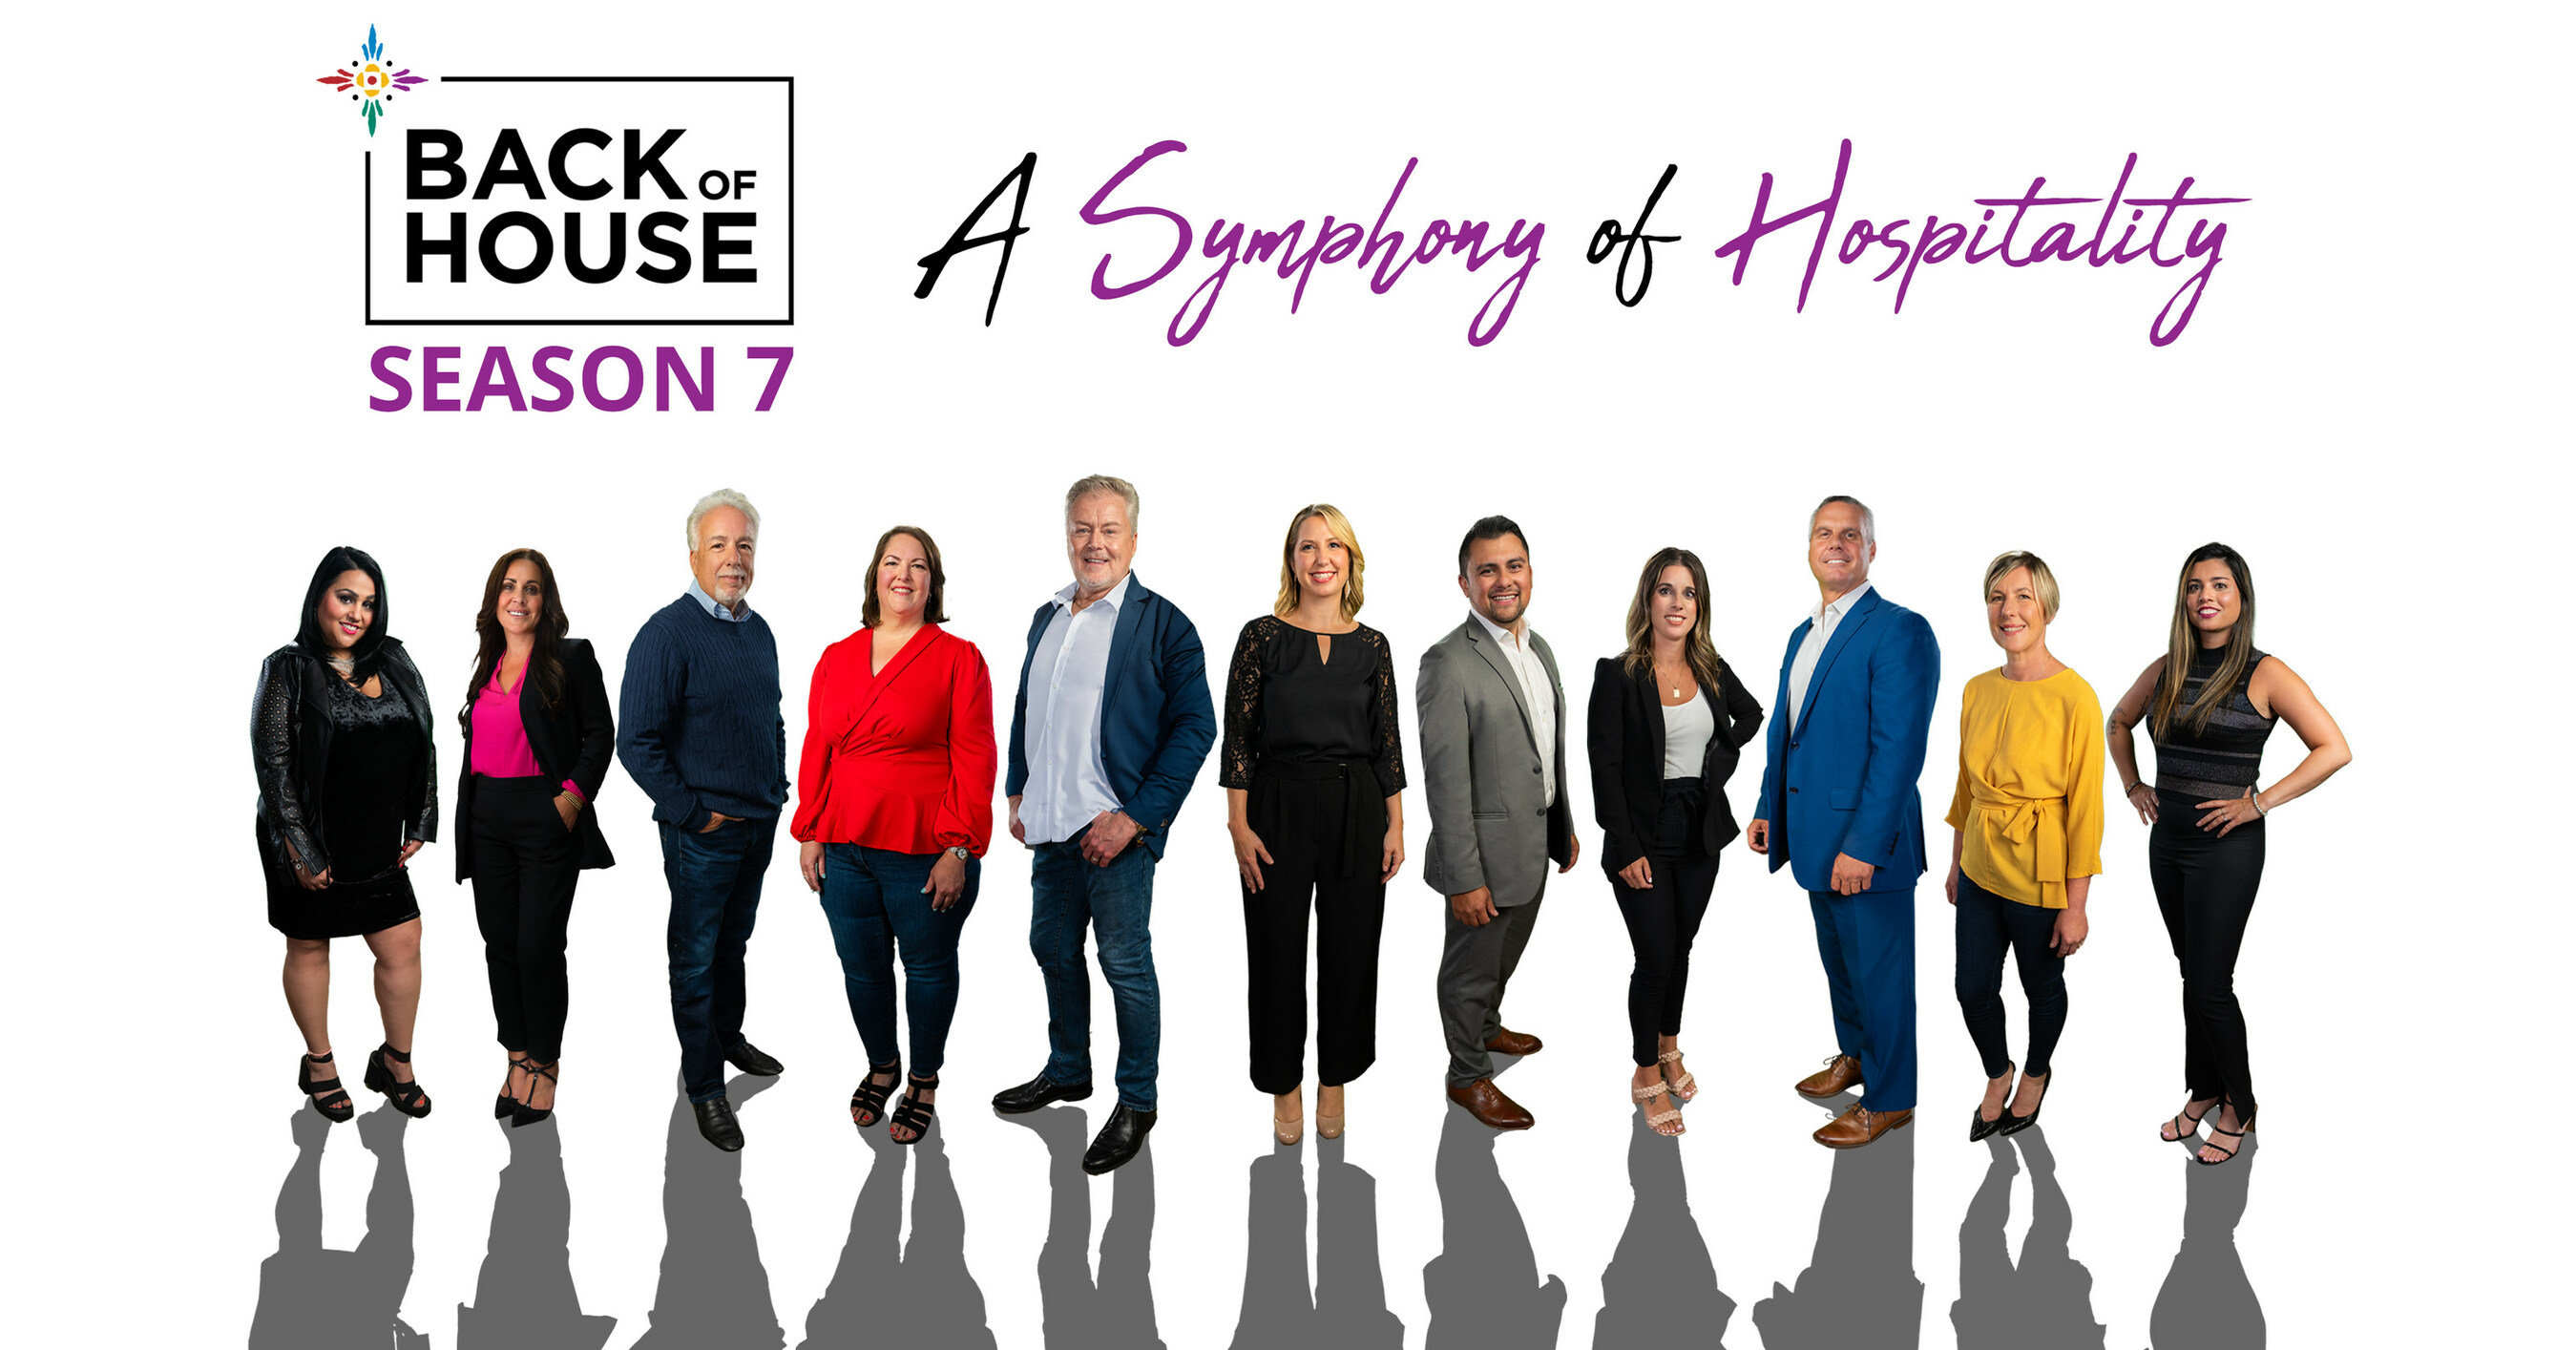 Behind the Scenes at Mohegan Sun: Back of House Returns for a Seventh  Season Showcasing Next Level Hospitality